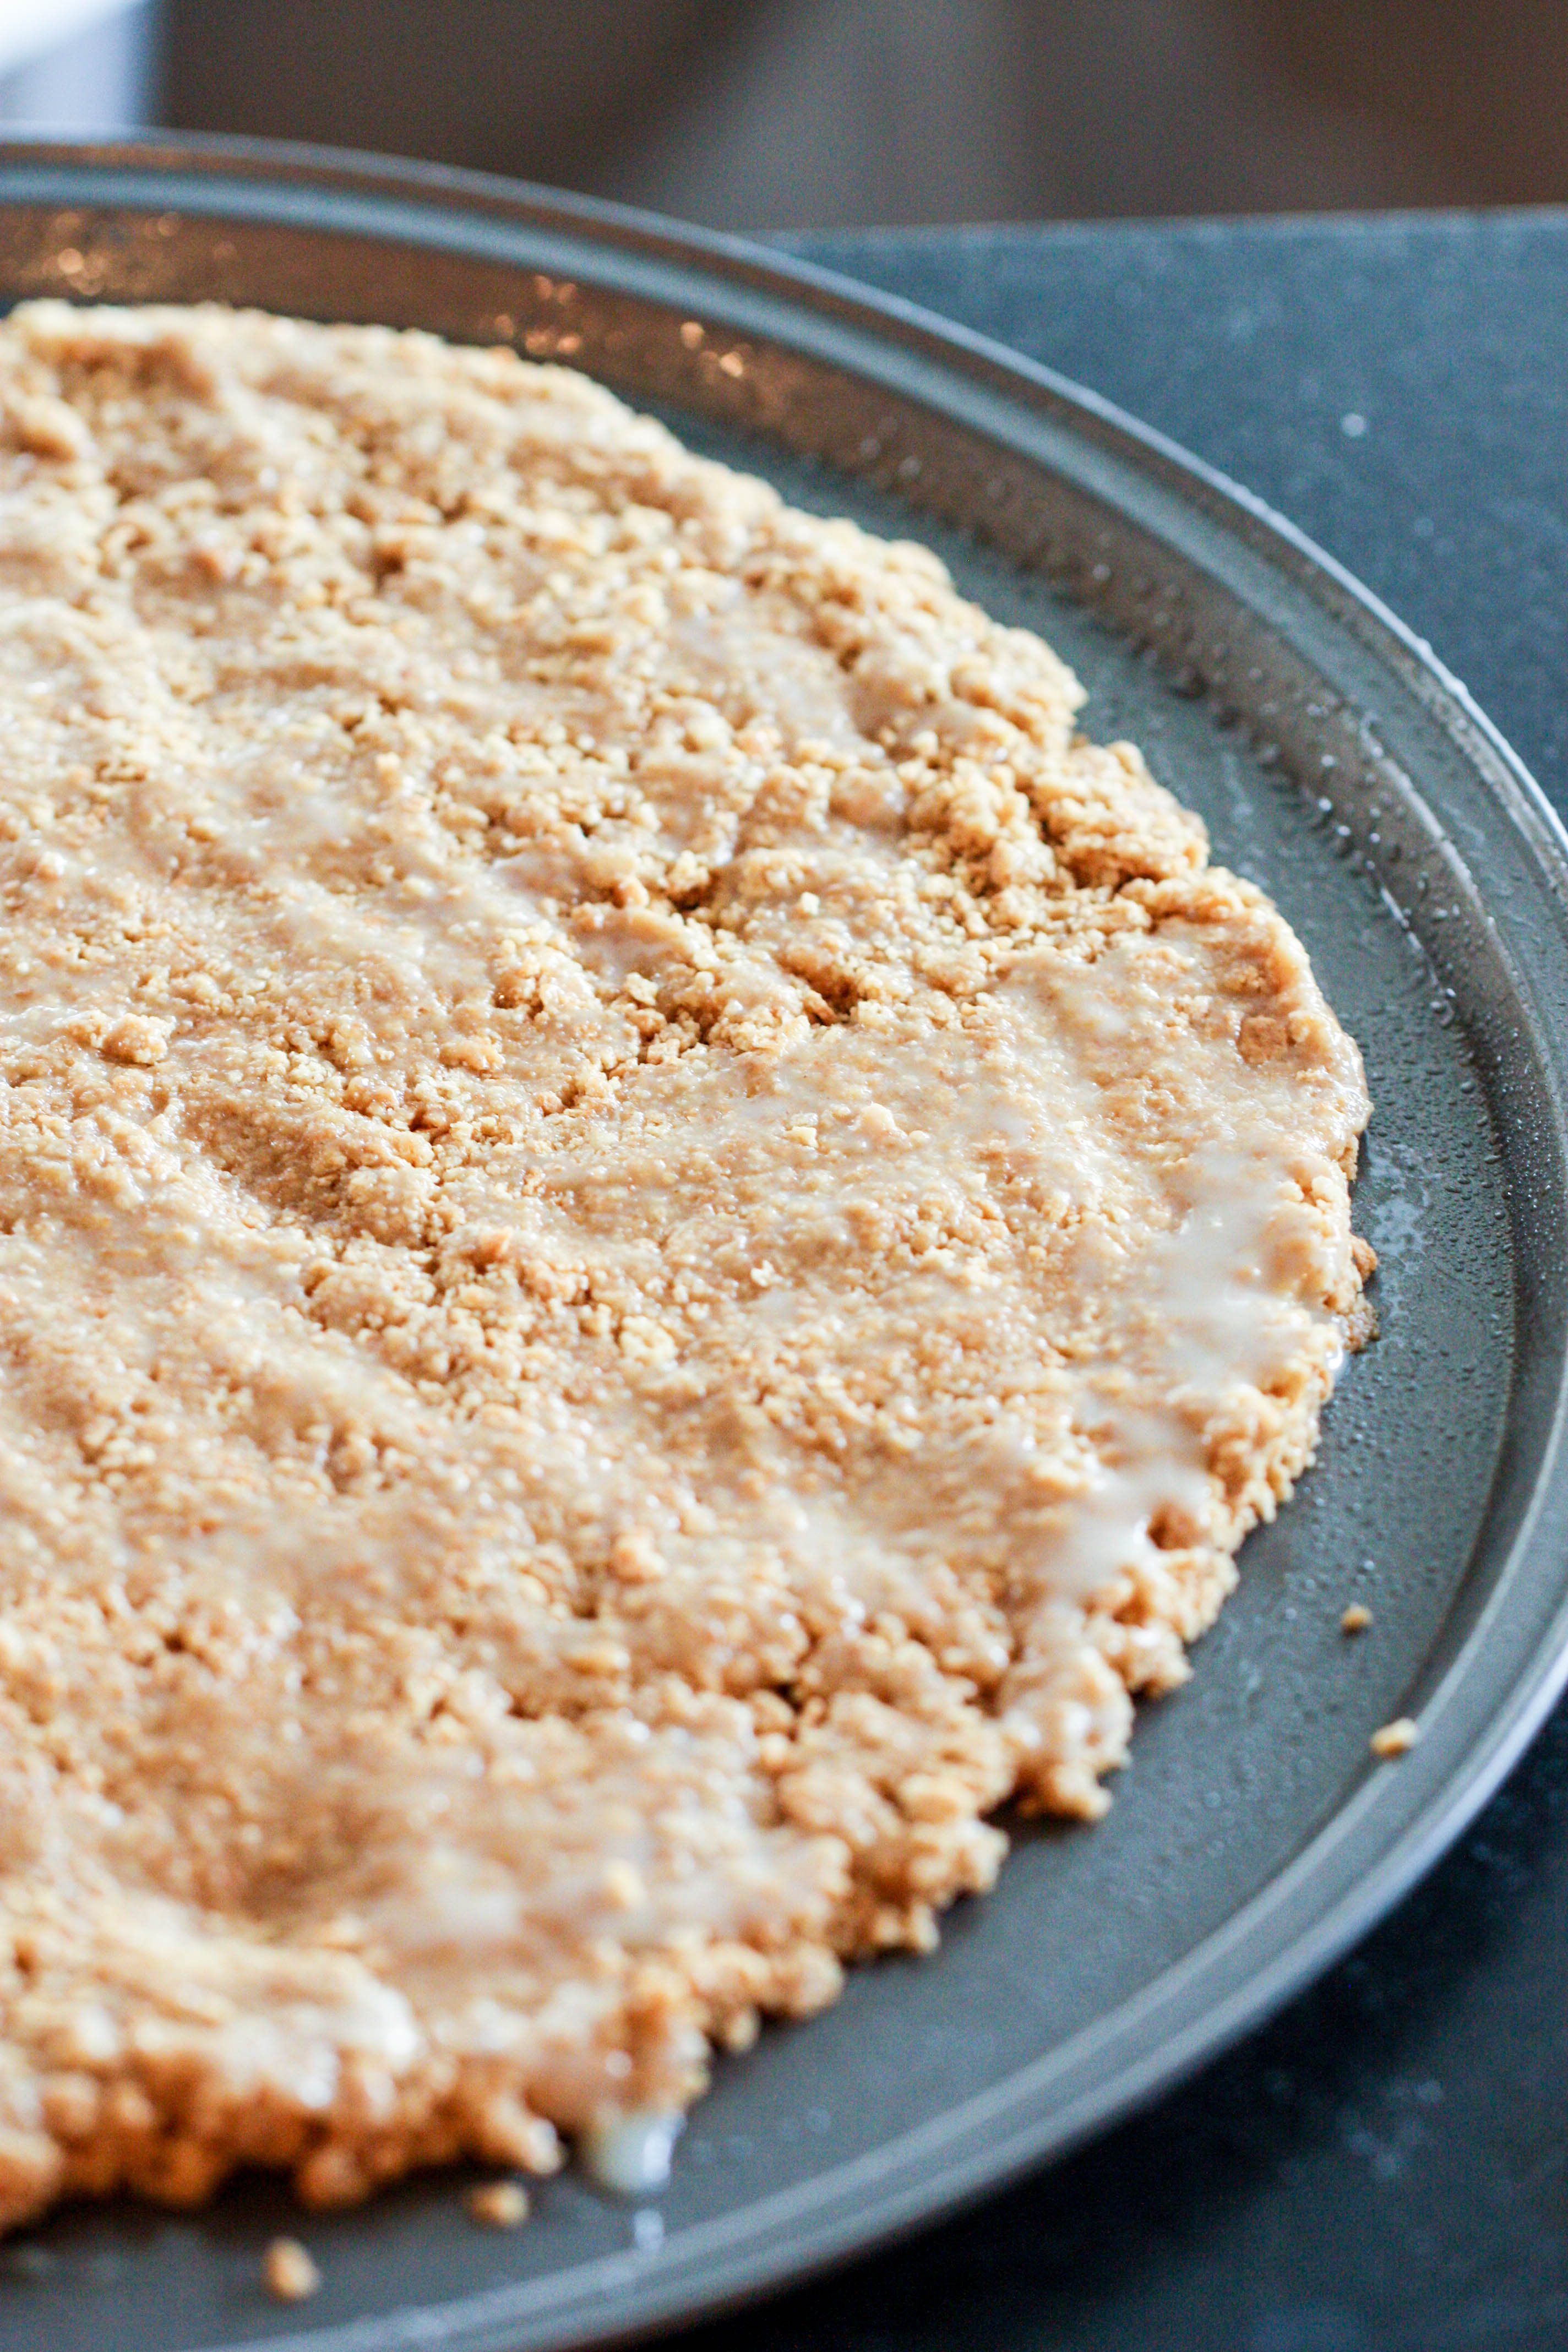 Crust mixture spread out on a round baking sheet